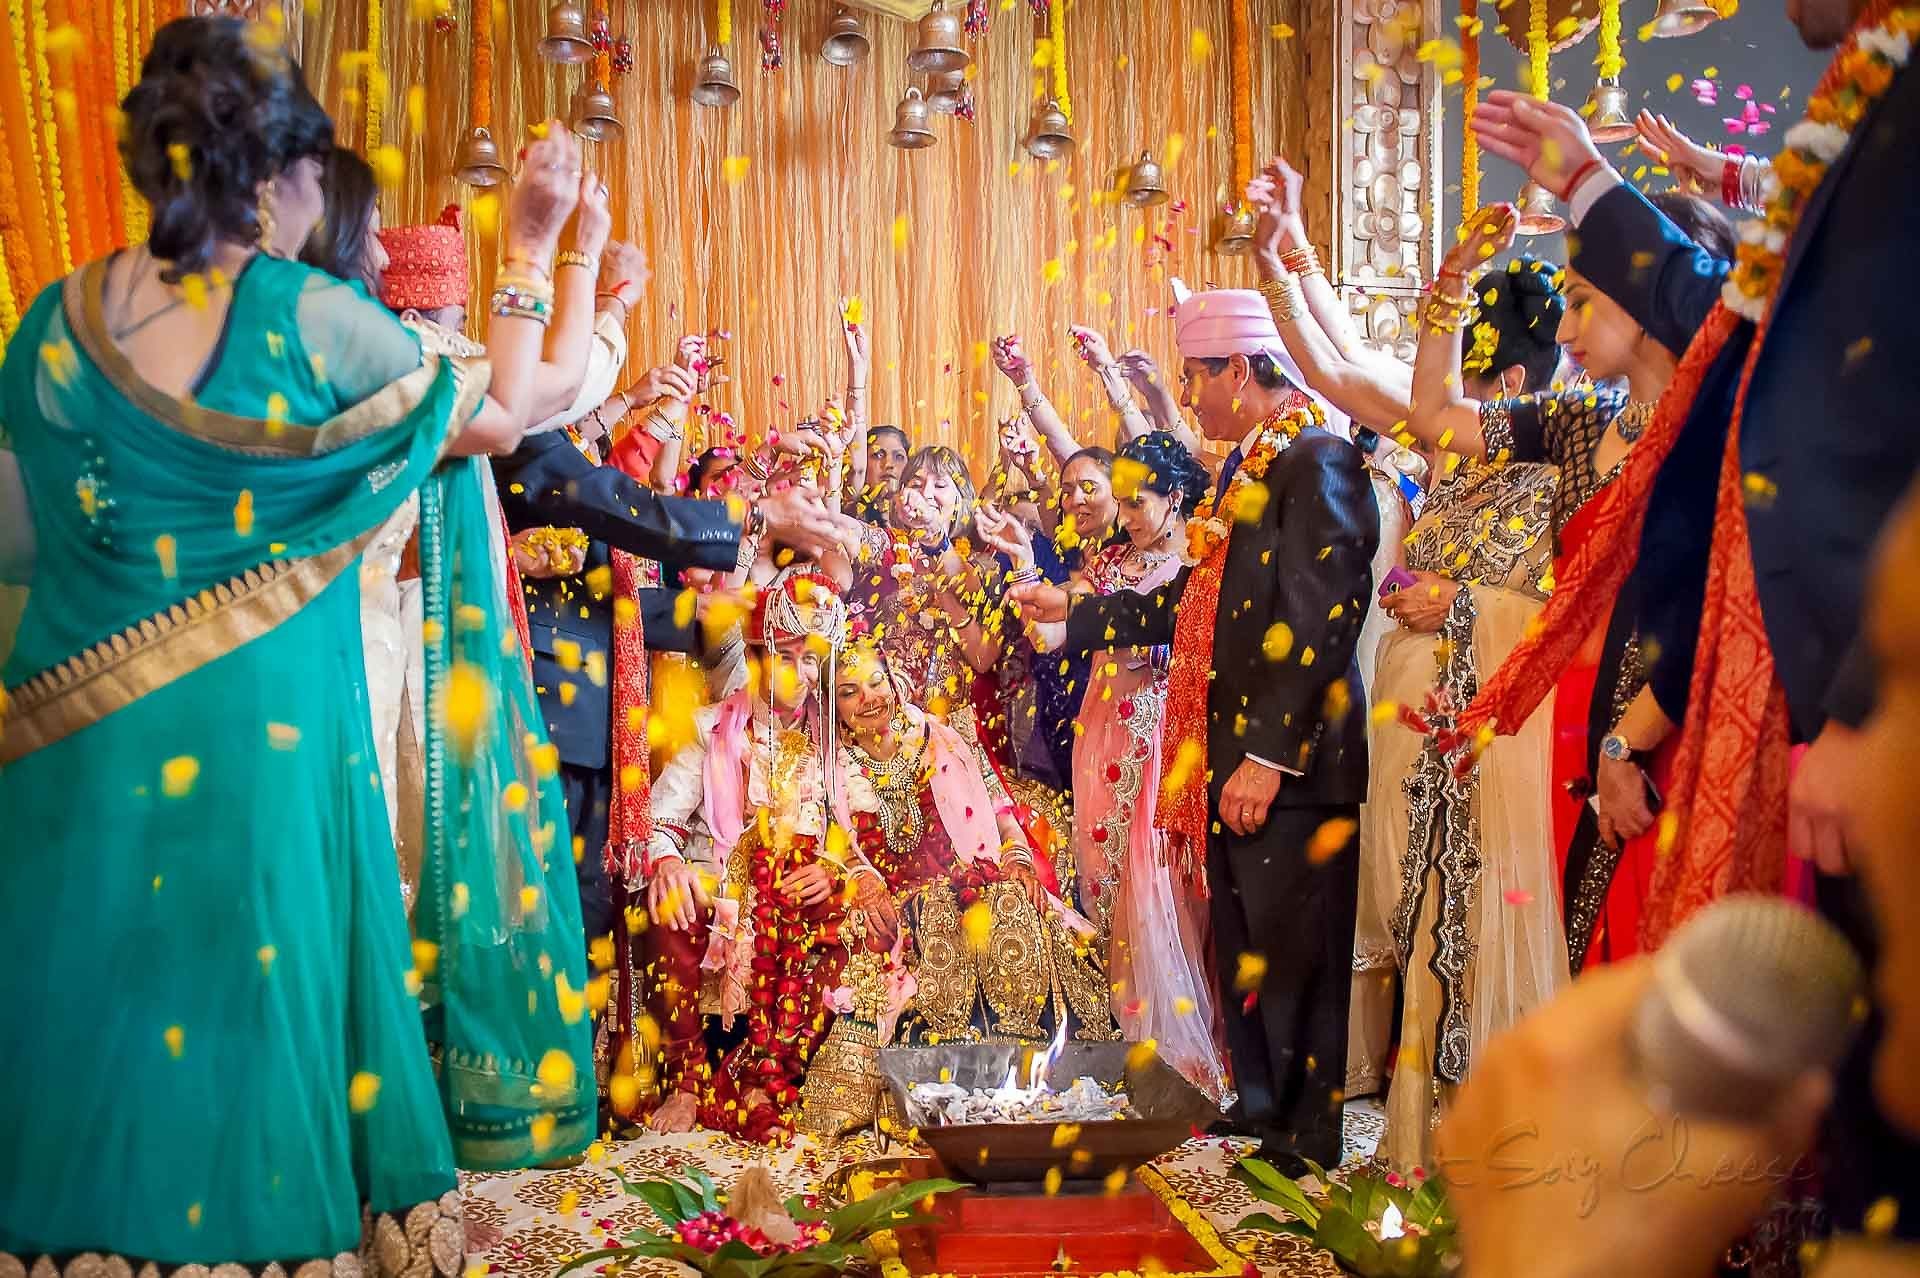 A floral blessing to the couple  by Gaurav Gupta, IDONTSAYCHEESE 